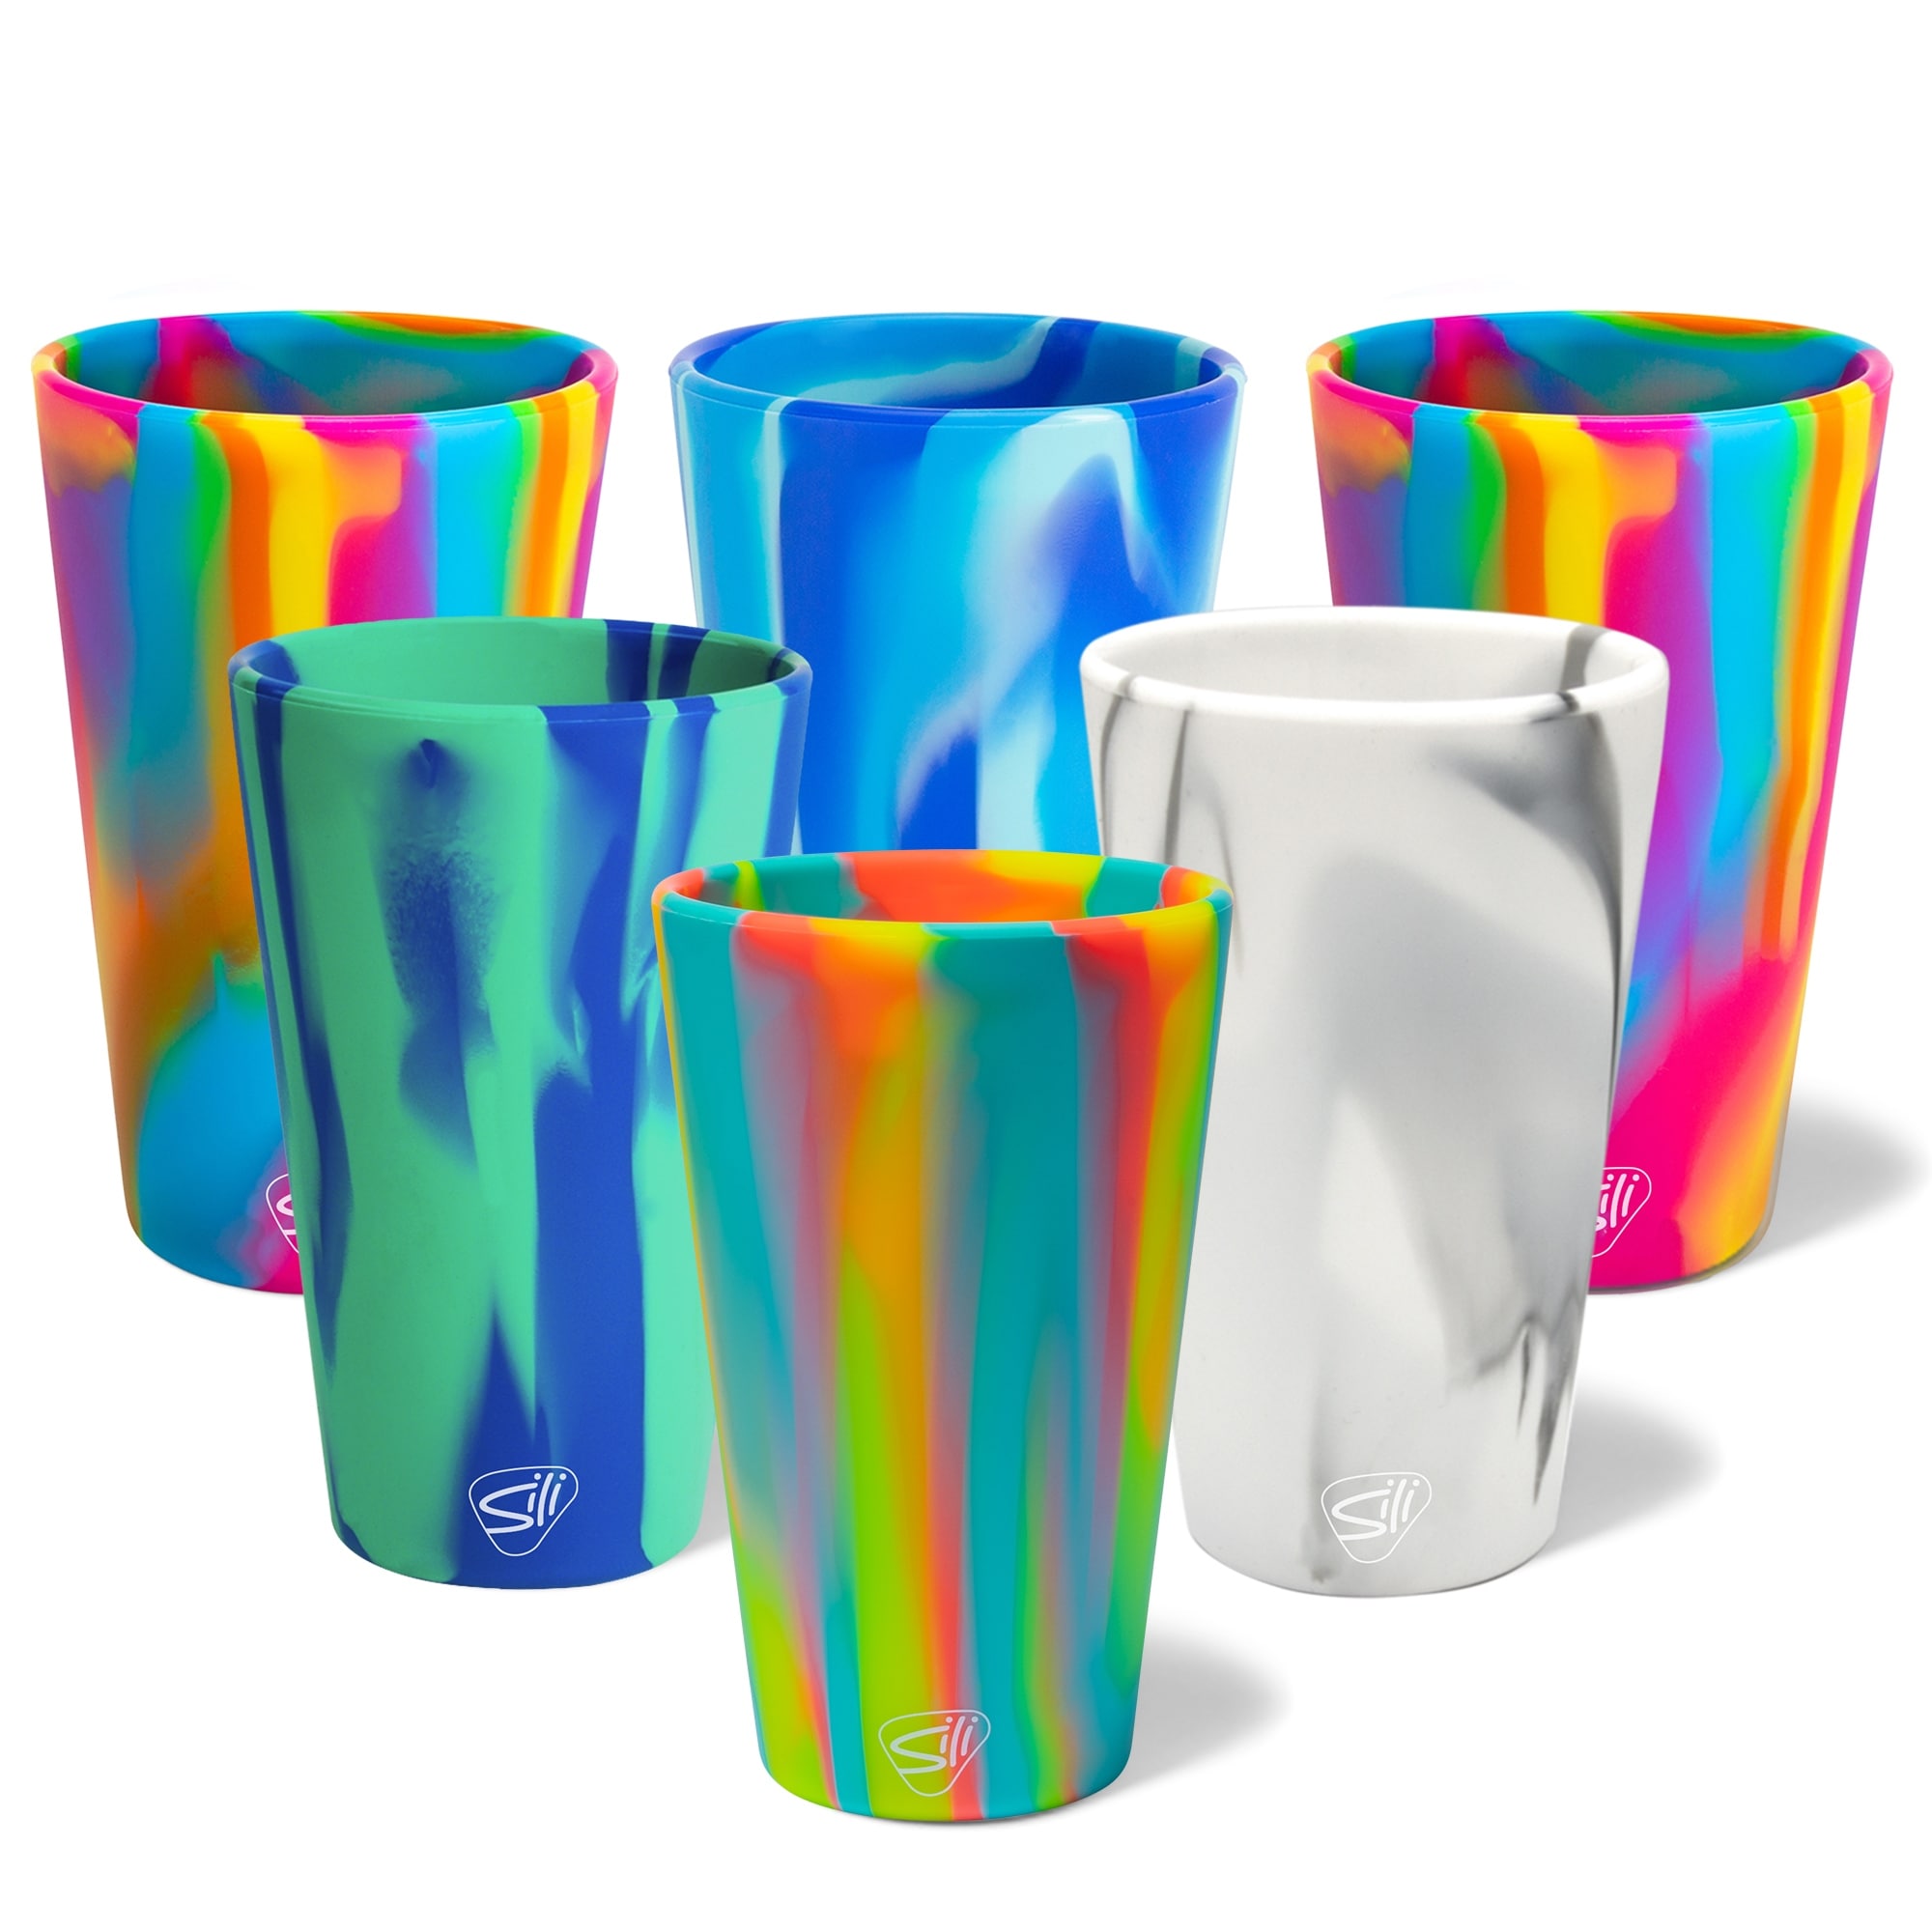 Silipint Silicone Pint Glasses: 6 Pack -Sugar Rush, Headwaters